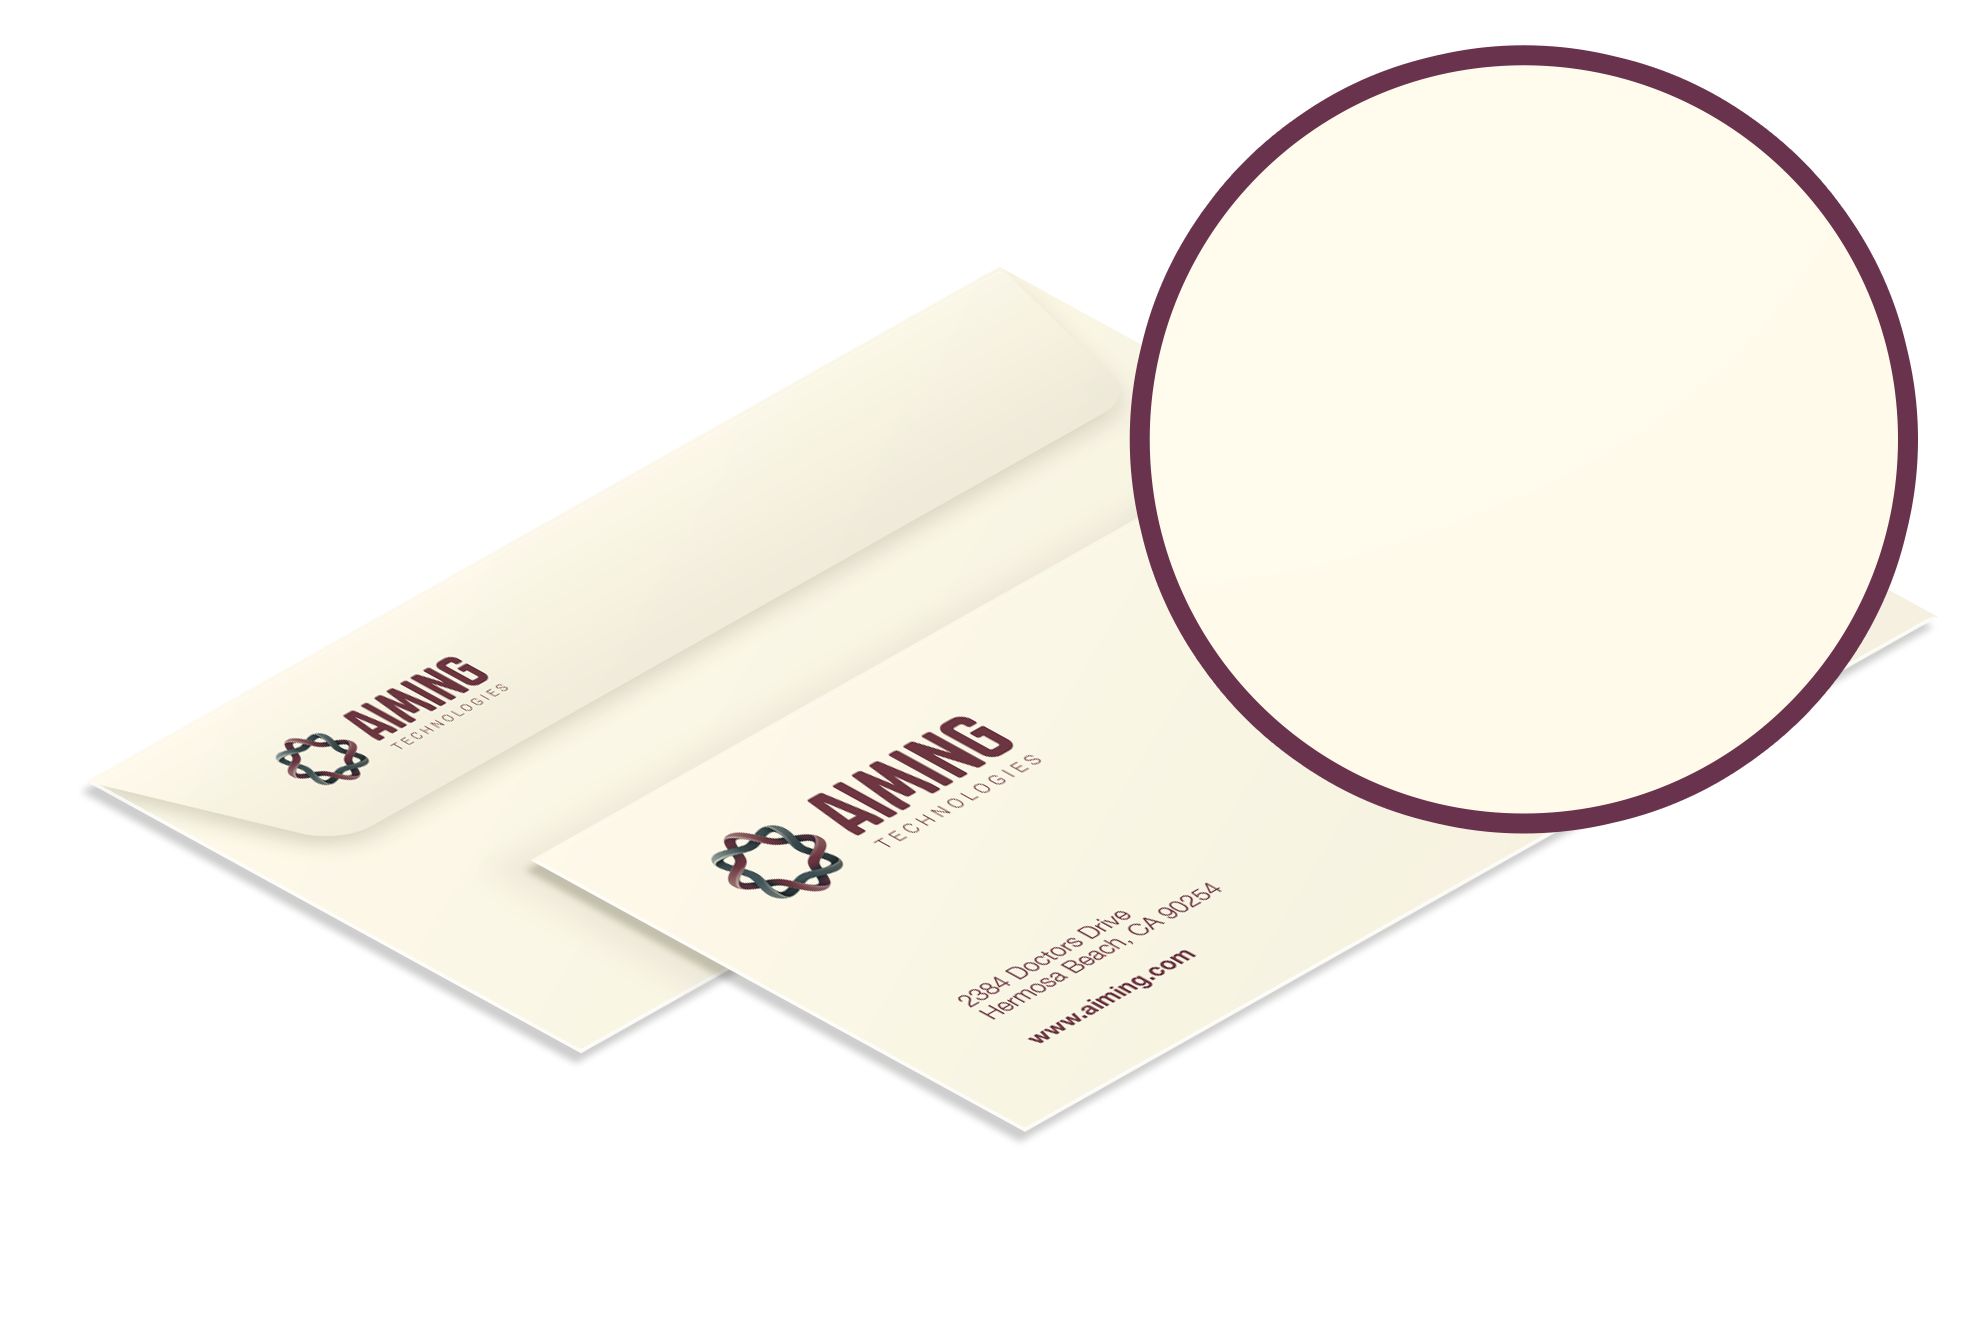 Vellum White Envelopes, to be customized online on Sprint24: Light parchement hue, high quality recycled paper. Order the Freelife Vellum White envelopes on Sprint24: the quality is online